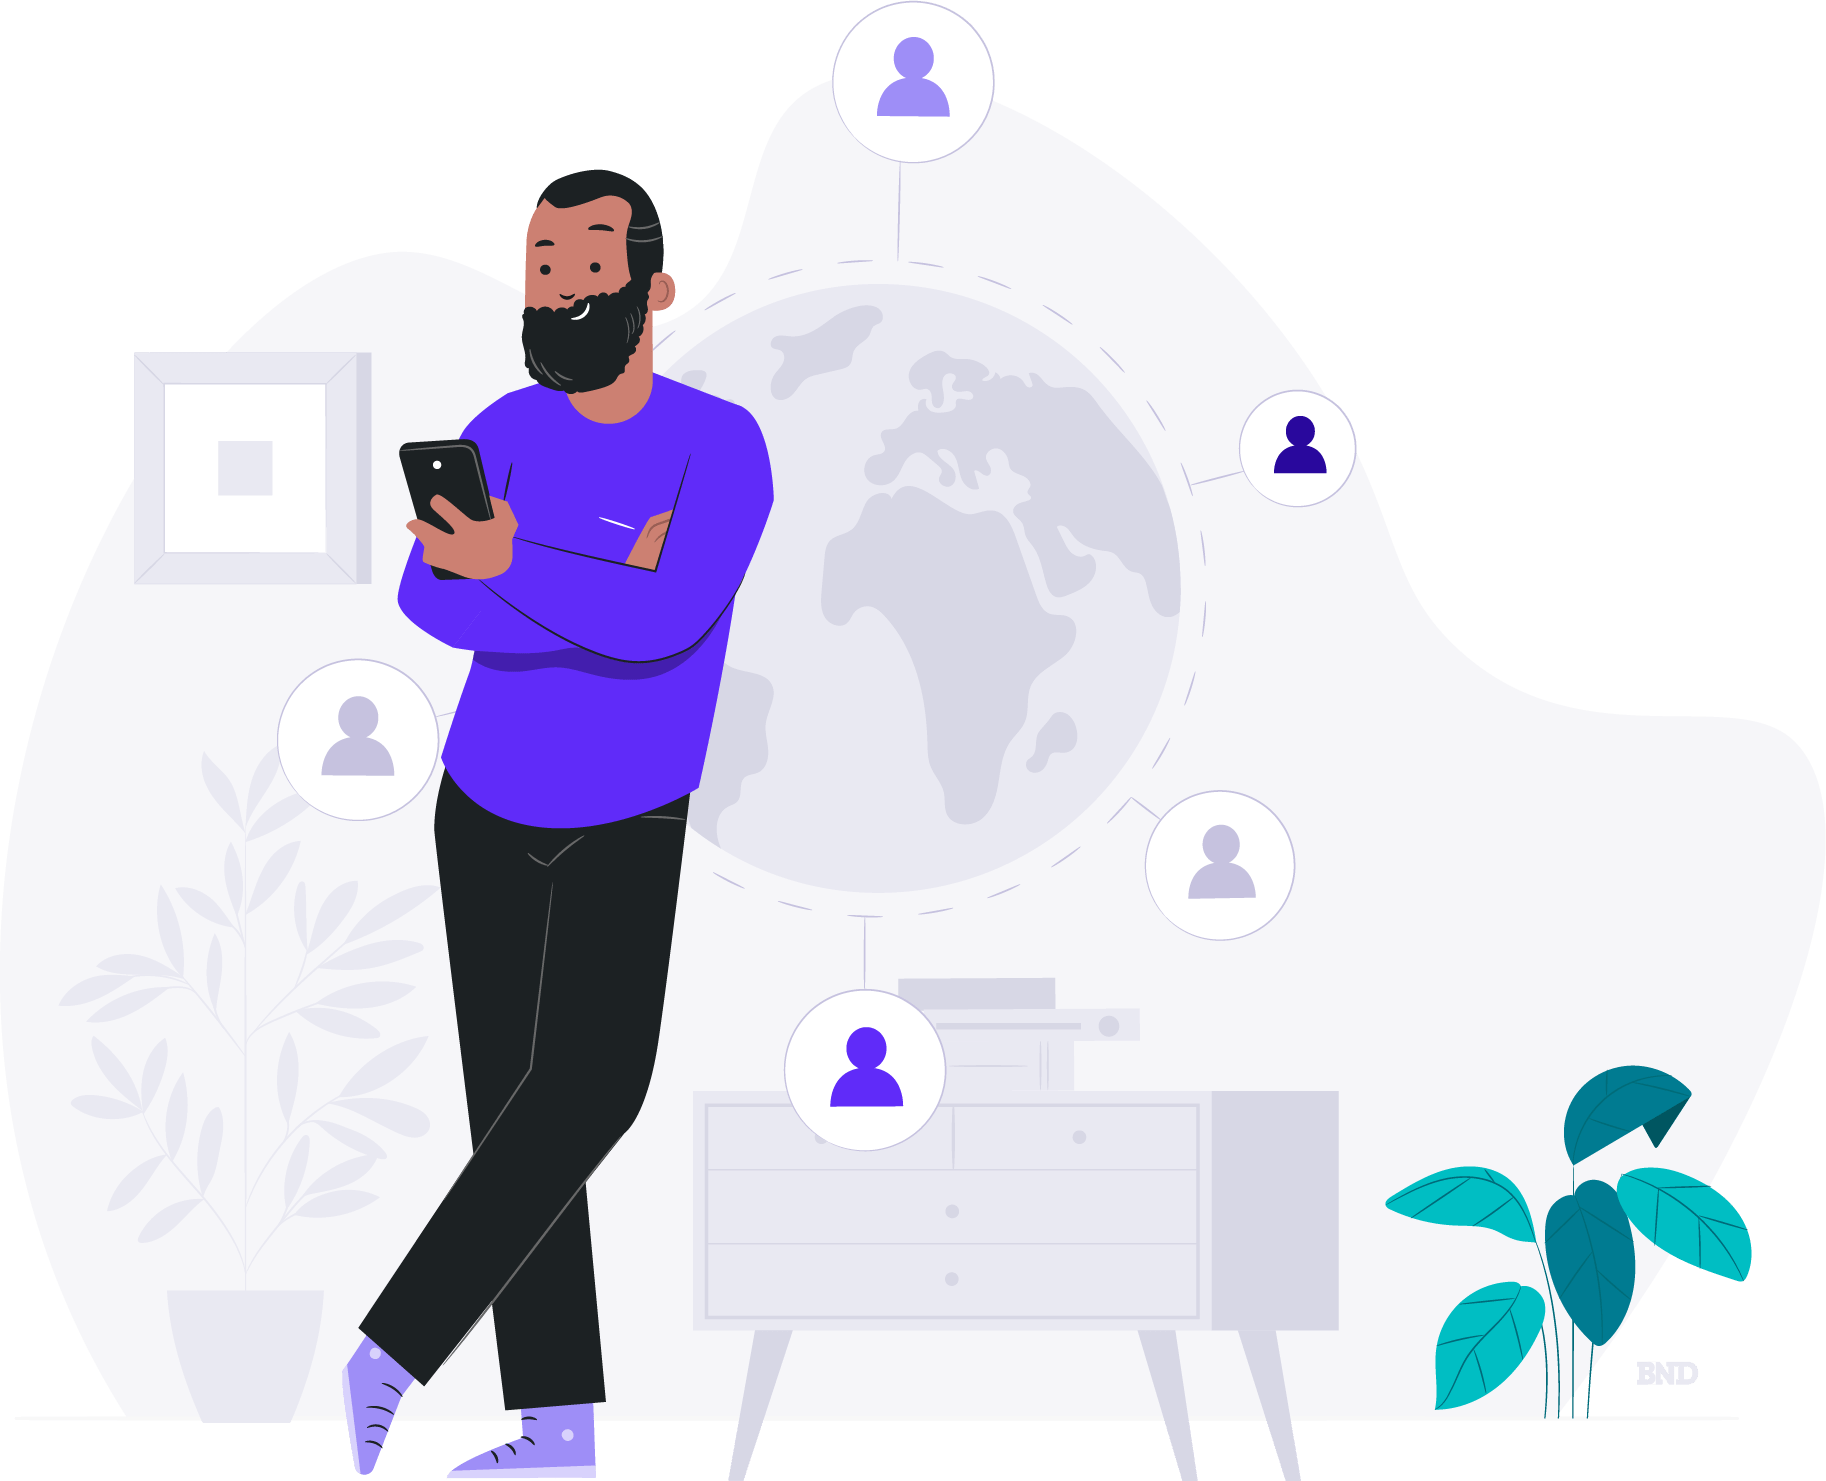 graphic of a person holding a smartphone next to a globe